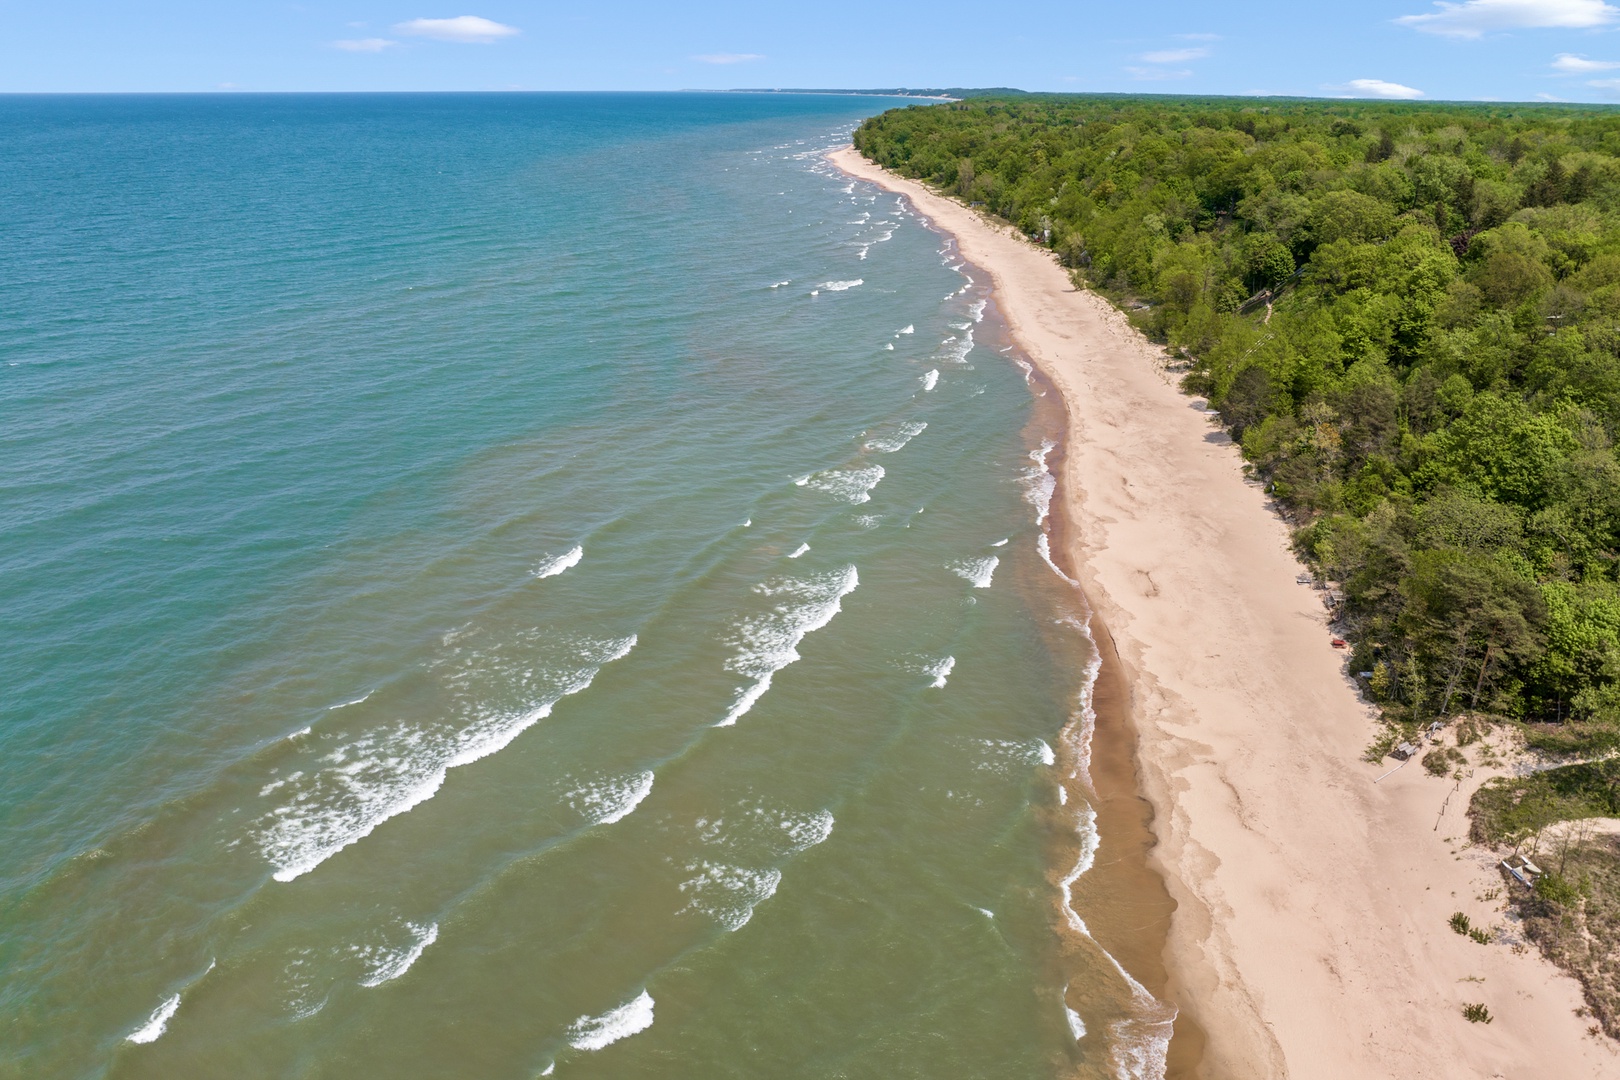 Enjoy the pristine beaches and waters of Lake Michigan!